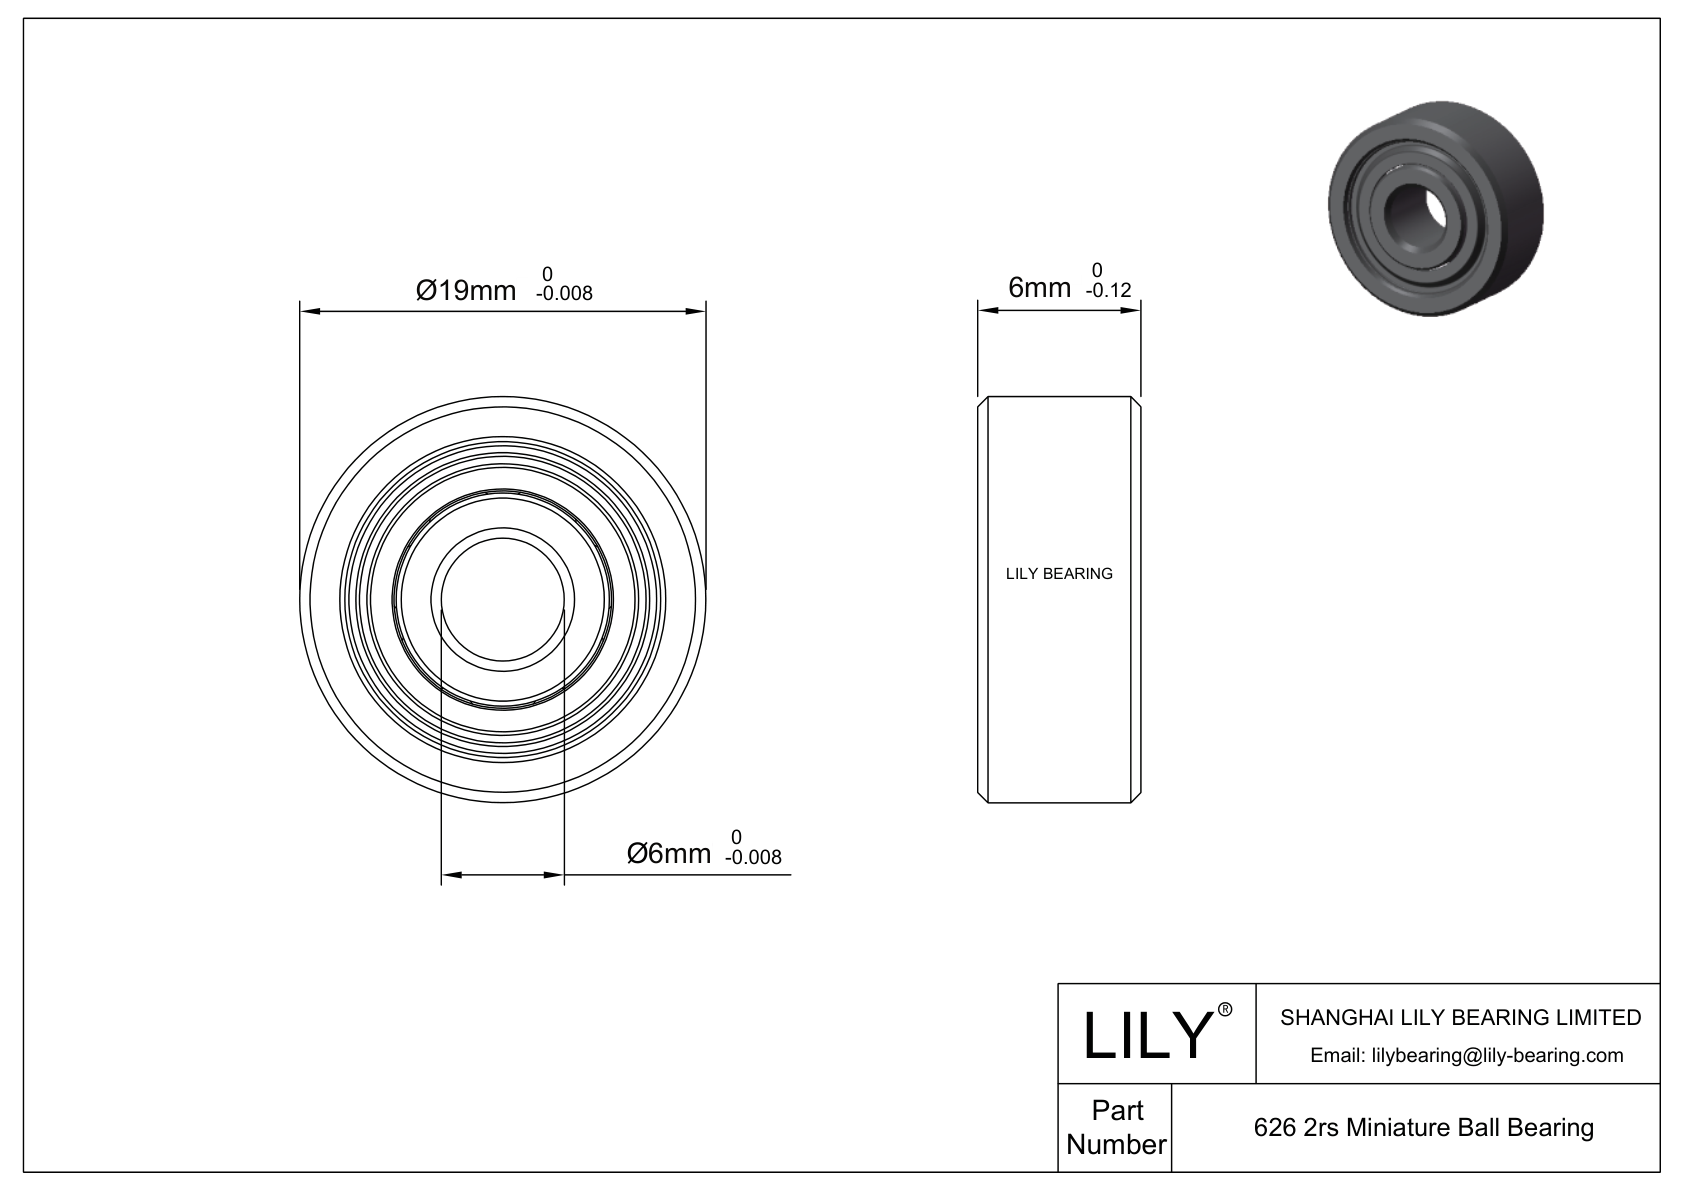 LILY-PUT62635-45 Outsourcing Polyurethane bearings cad drawing